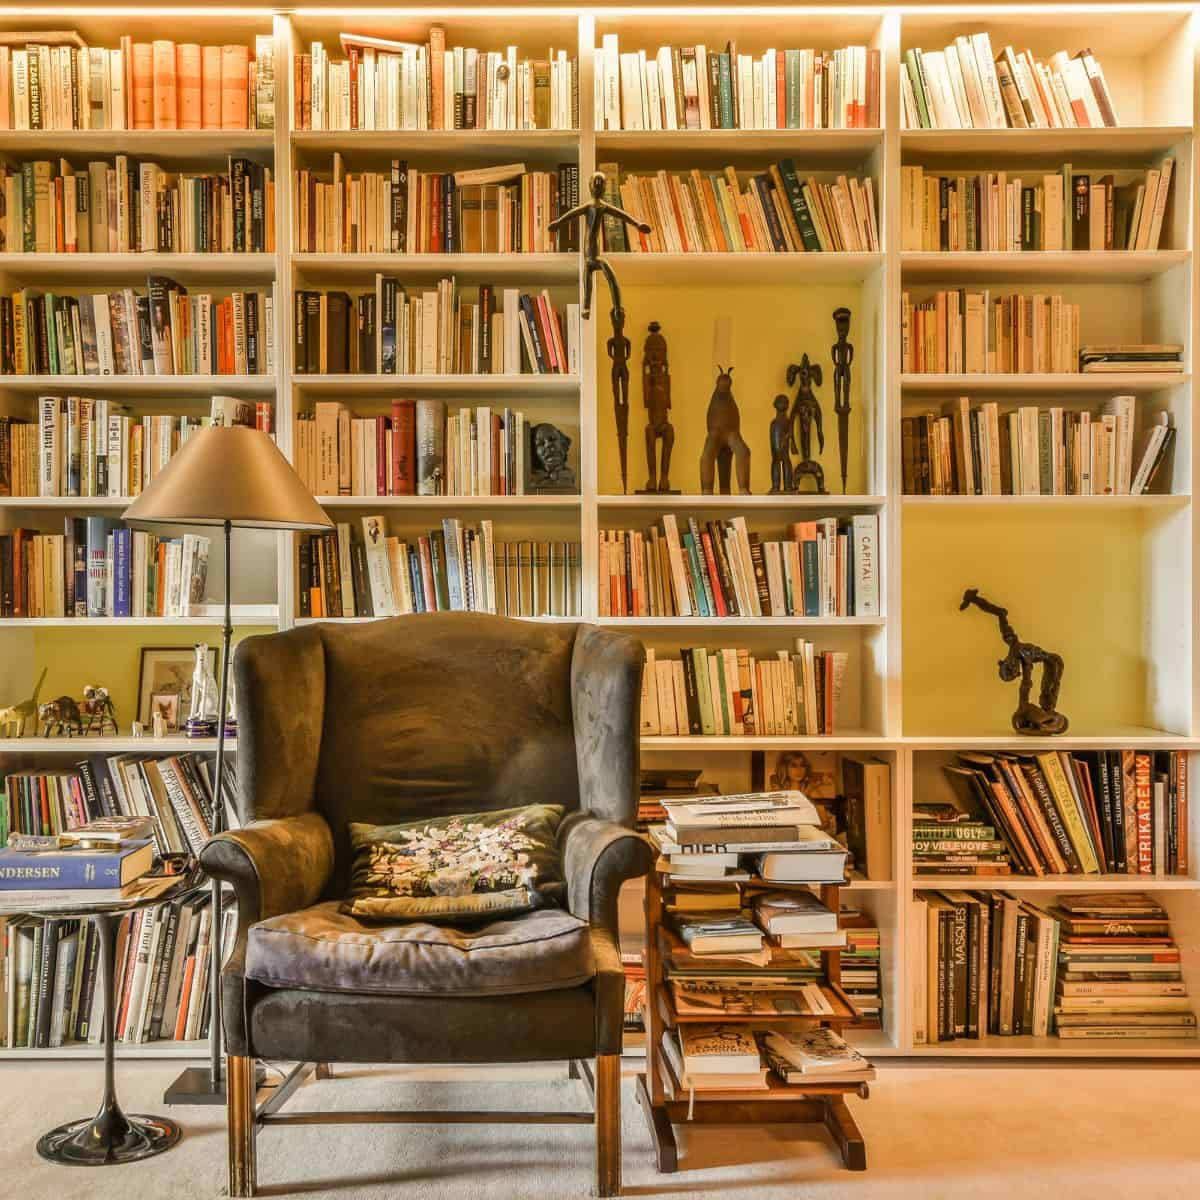 chair in front of bookshelves.